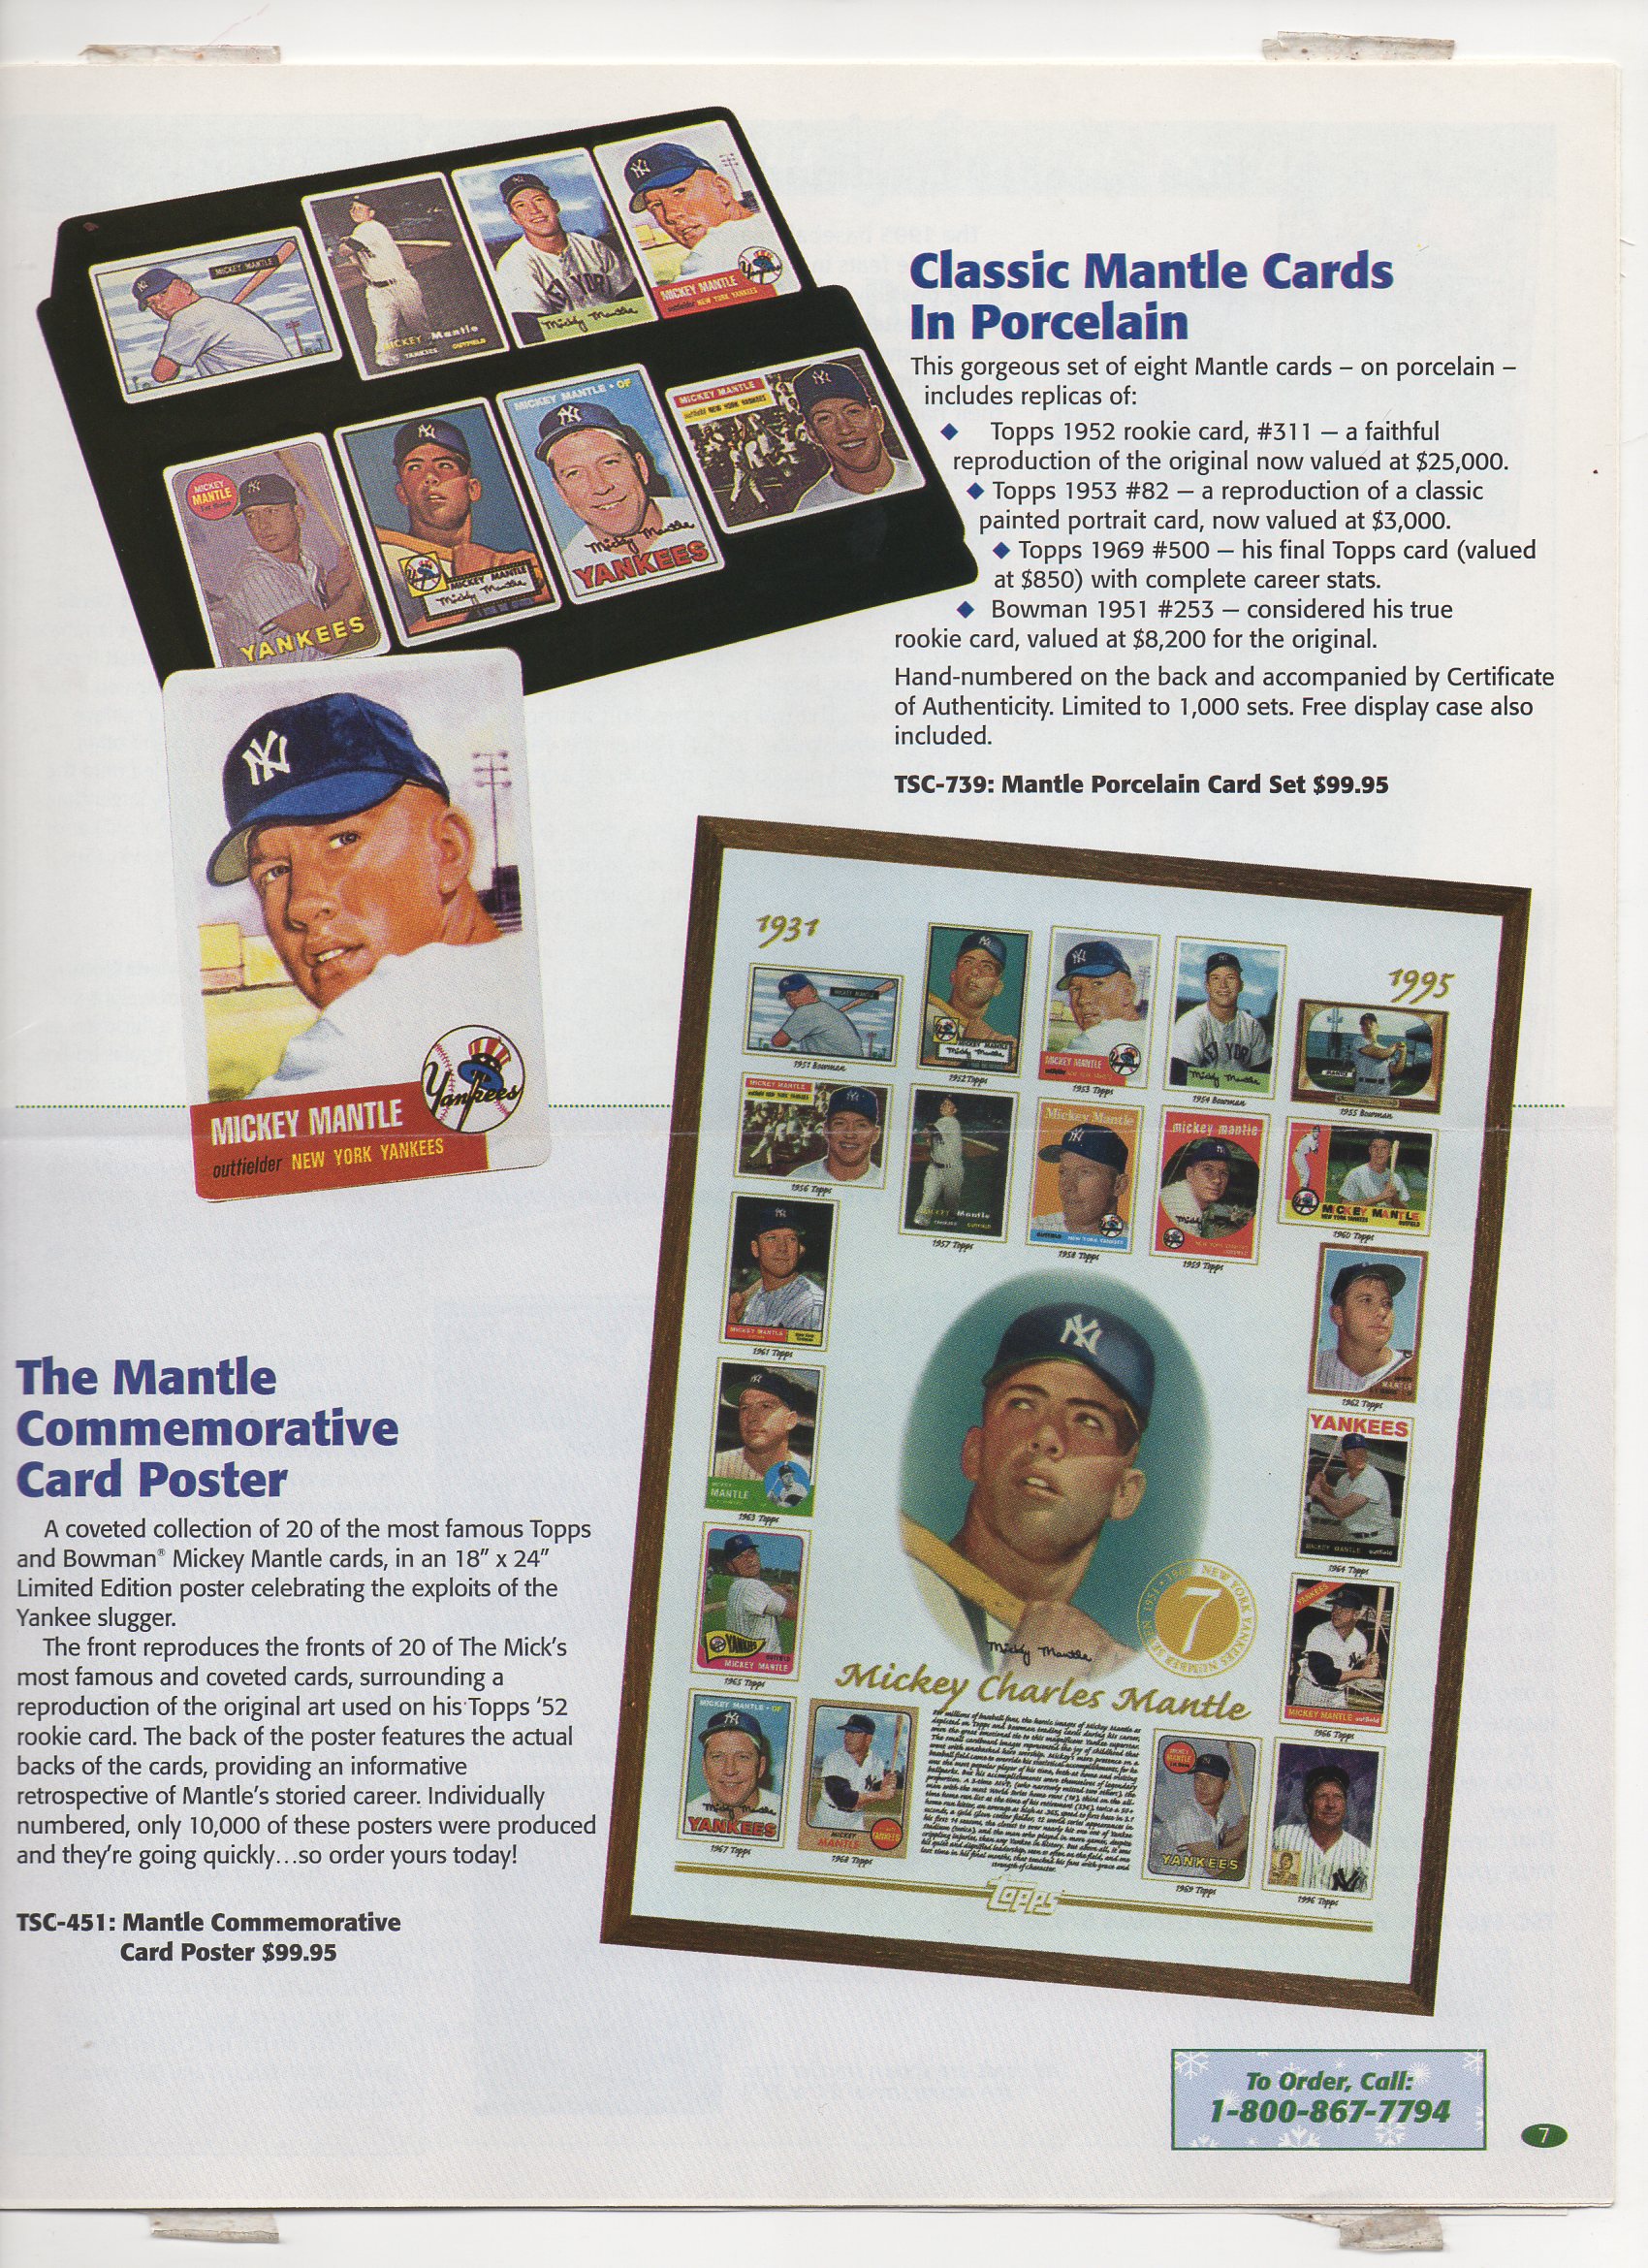 1996 topps direct tsc zone multi page xmas , volume 1 issue 1